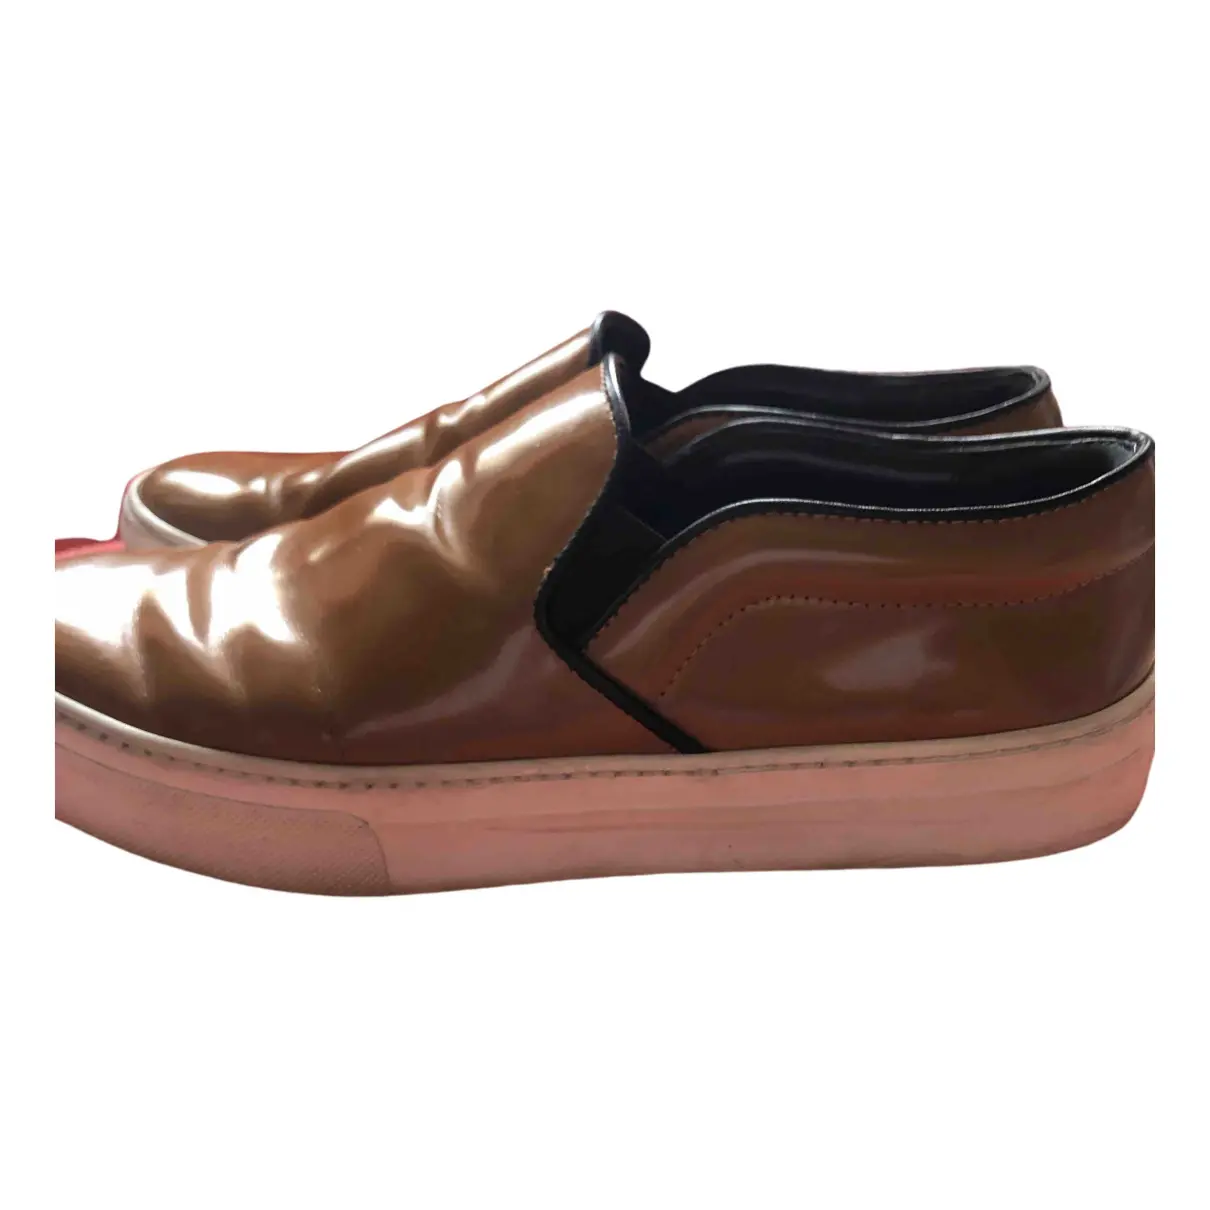 Buy Celine Patent leather trainers online